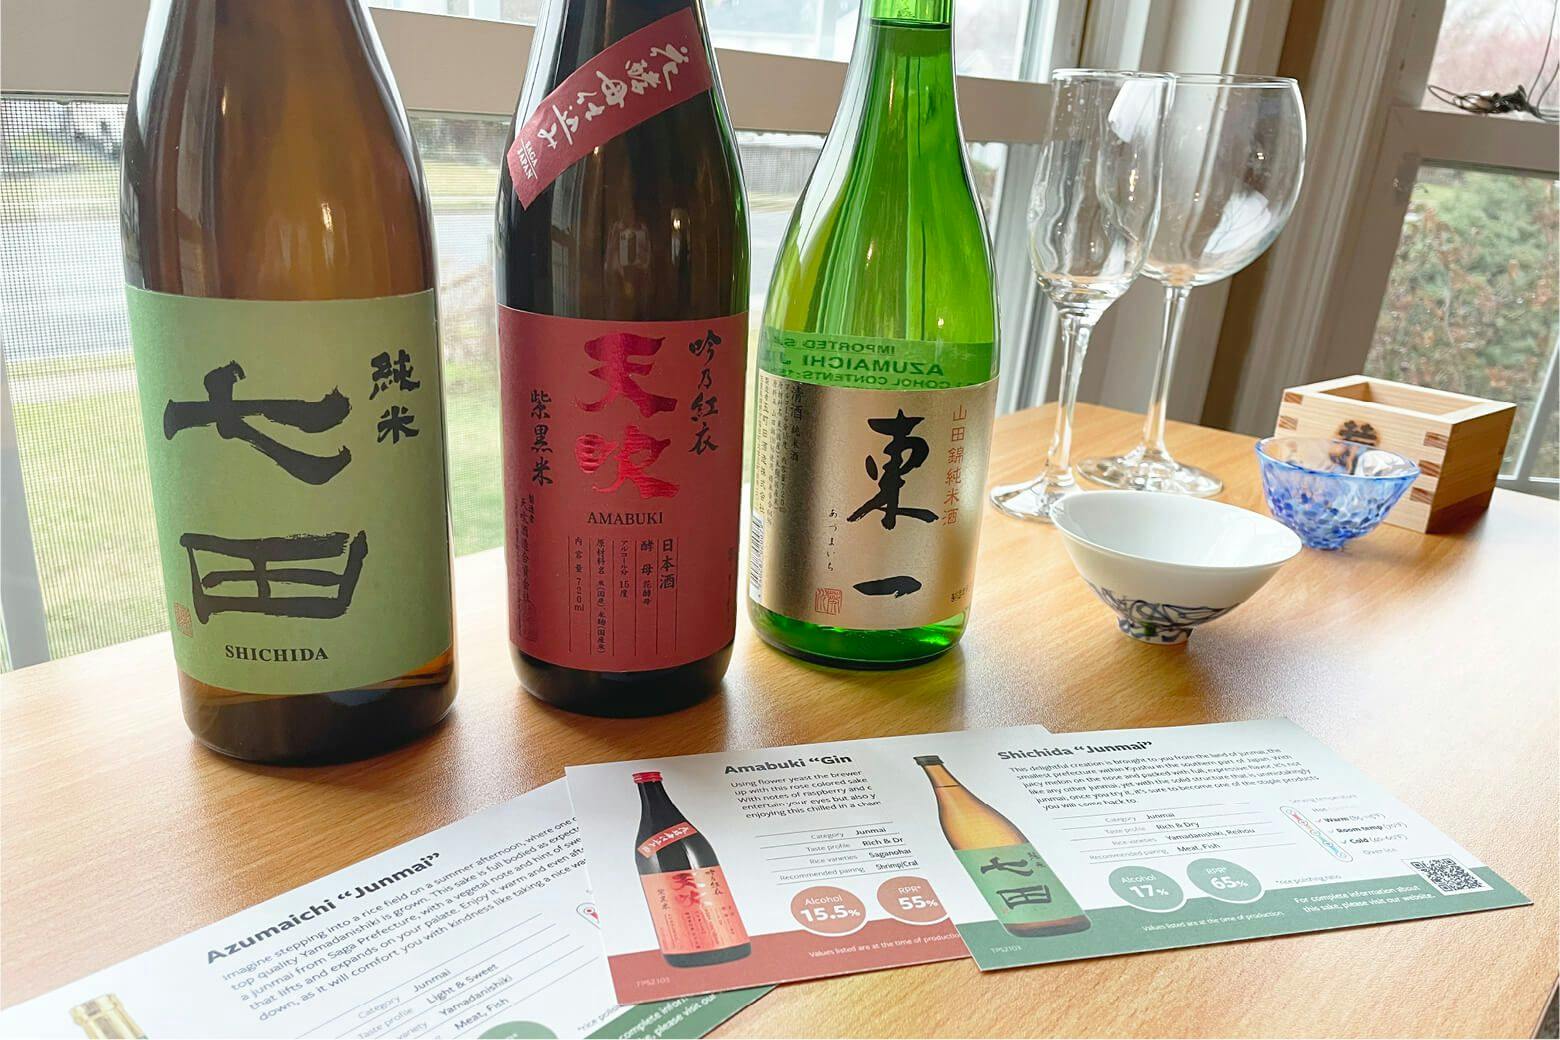 Sake from Saga with Tippsy's tasting cards